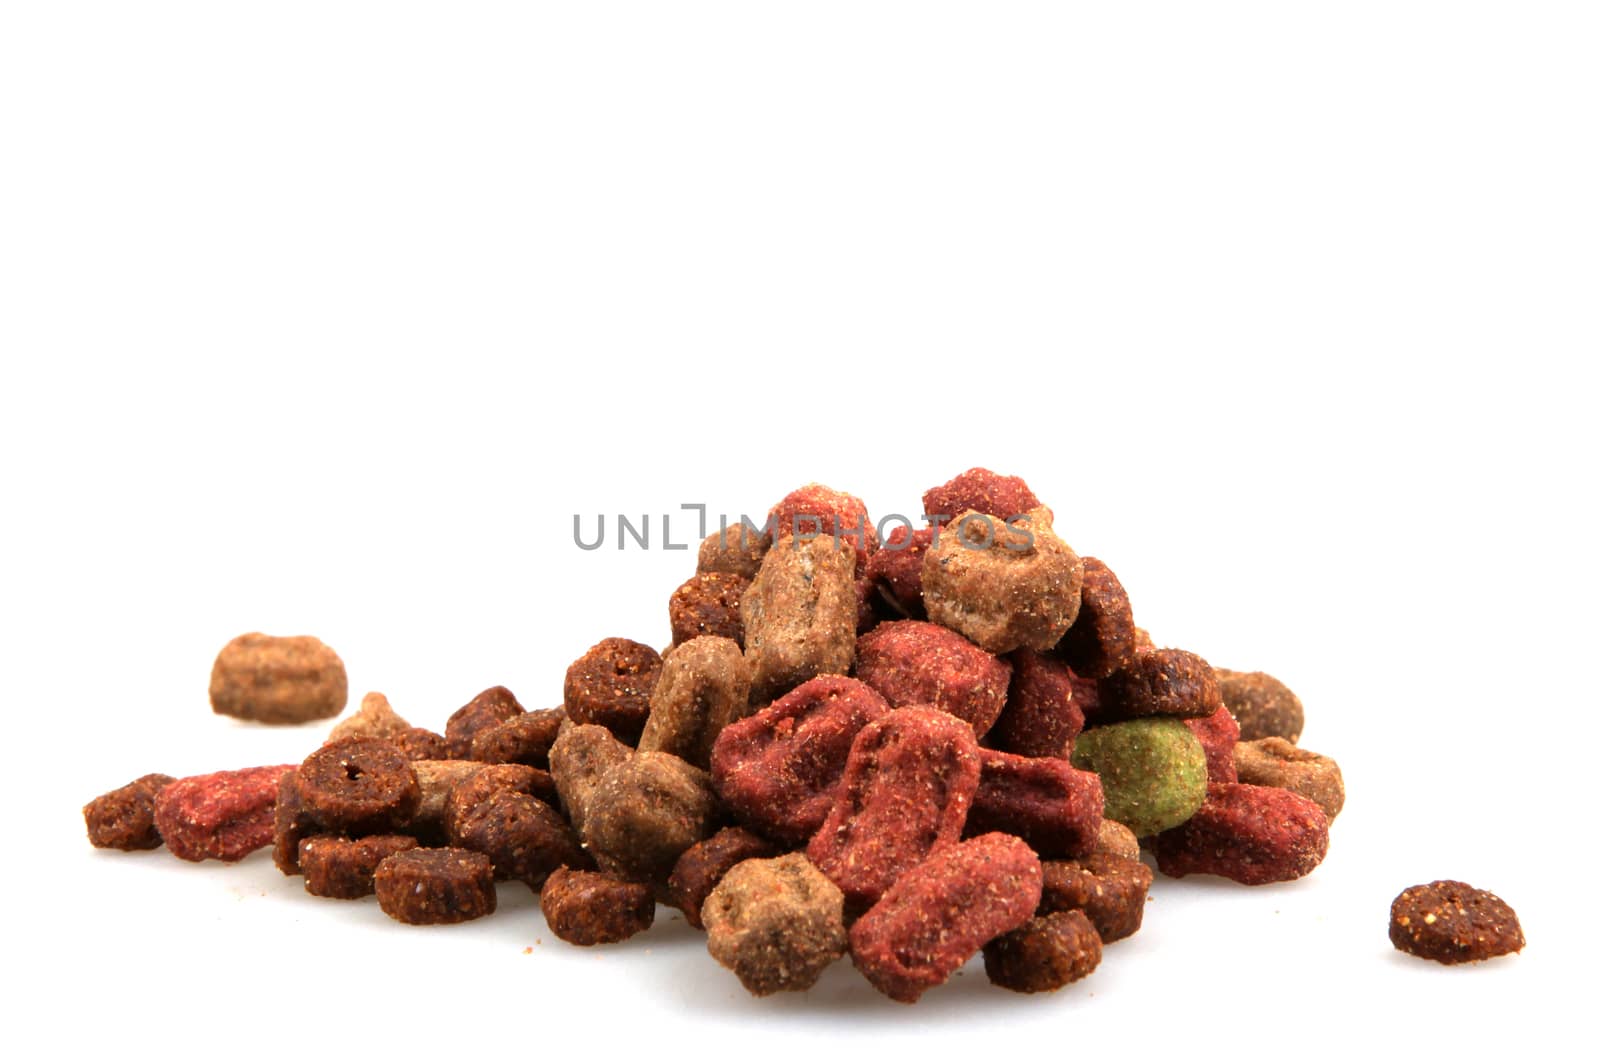 pet food isolated on white